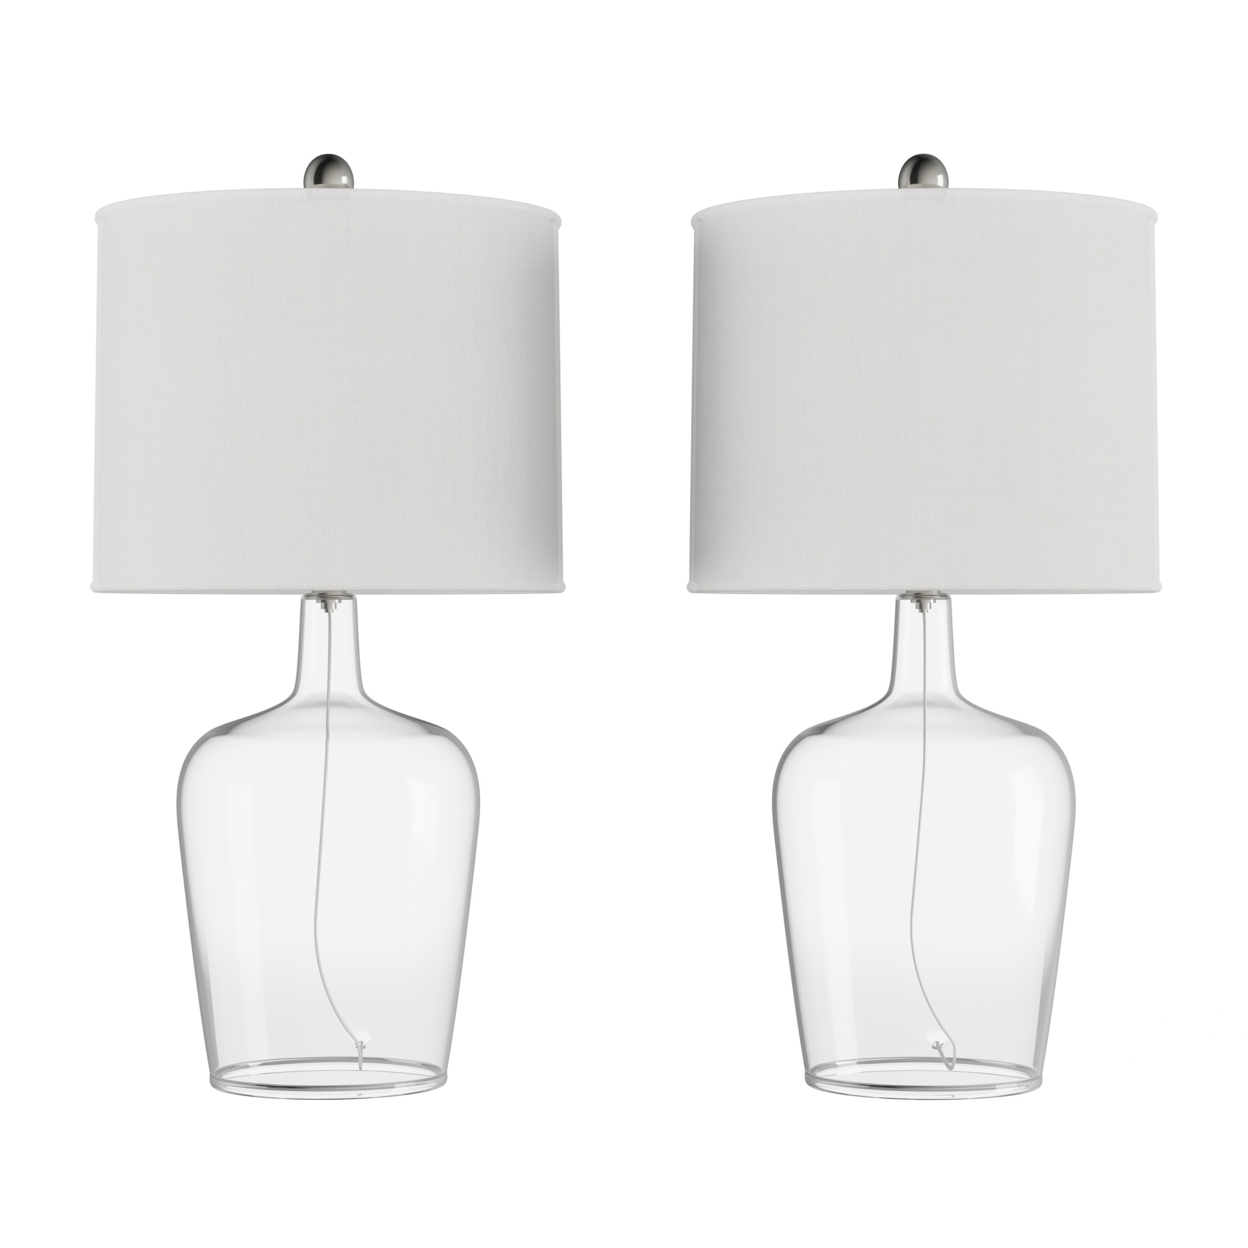 Table Lamps Set Of 2 Cloche Style Glass Modern Farmhouse Lighting For Living Room, Bedroom Or Office